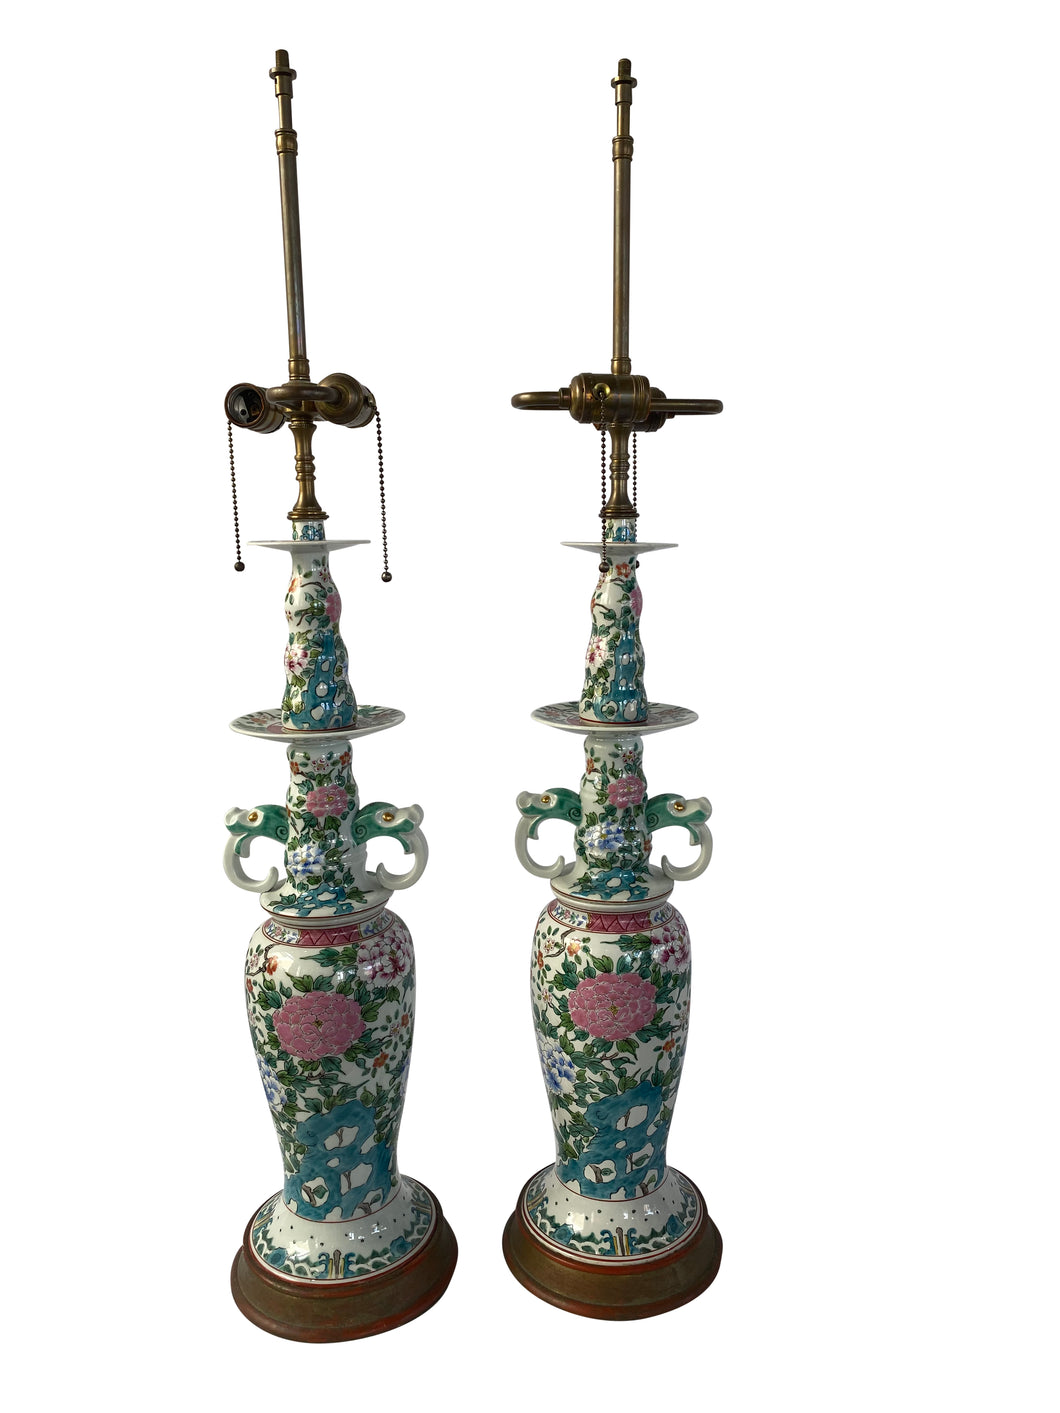 Vintage Painted Chinoiserie Style Lamp (Pair)